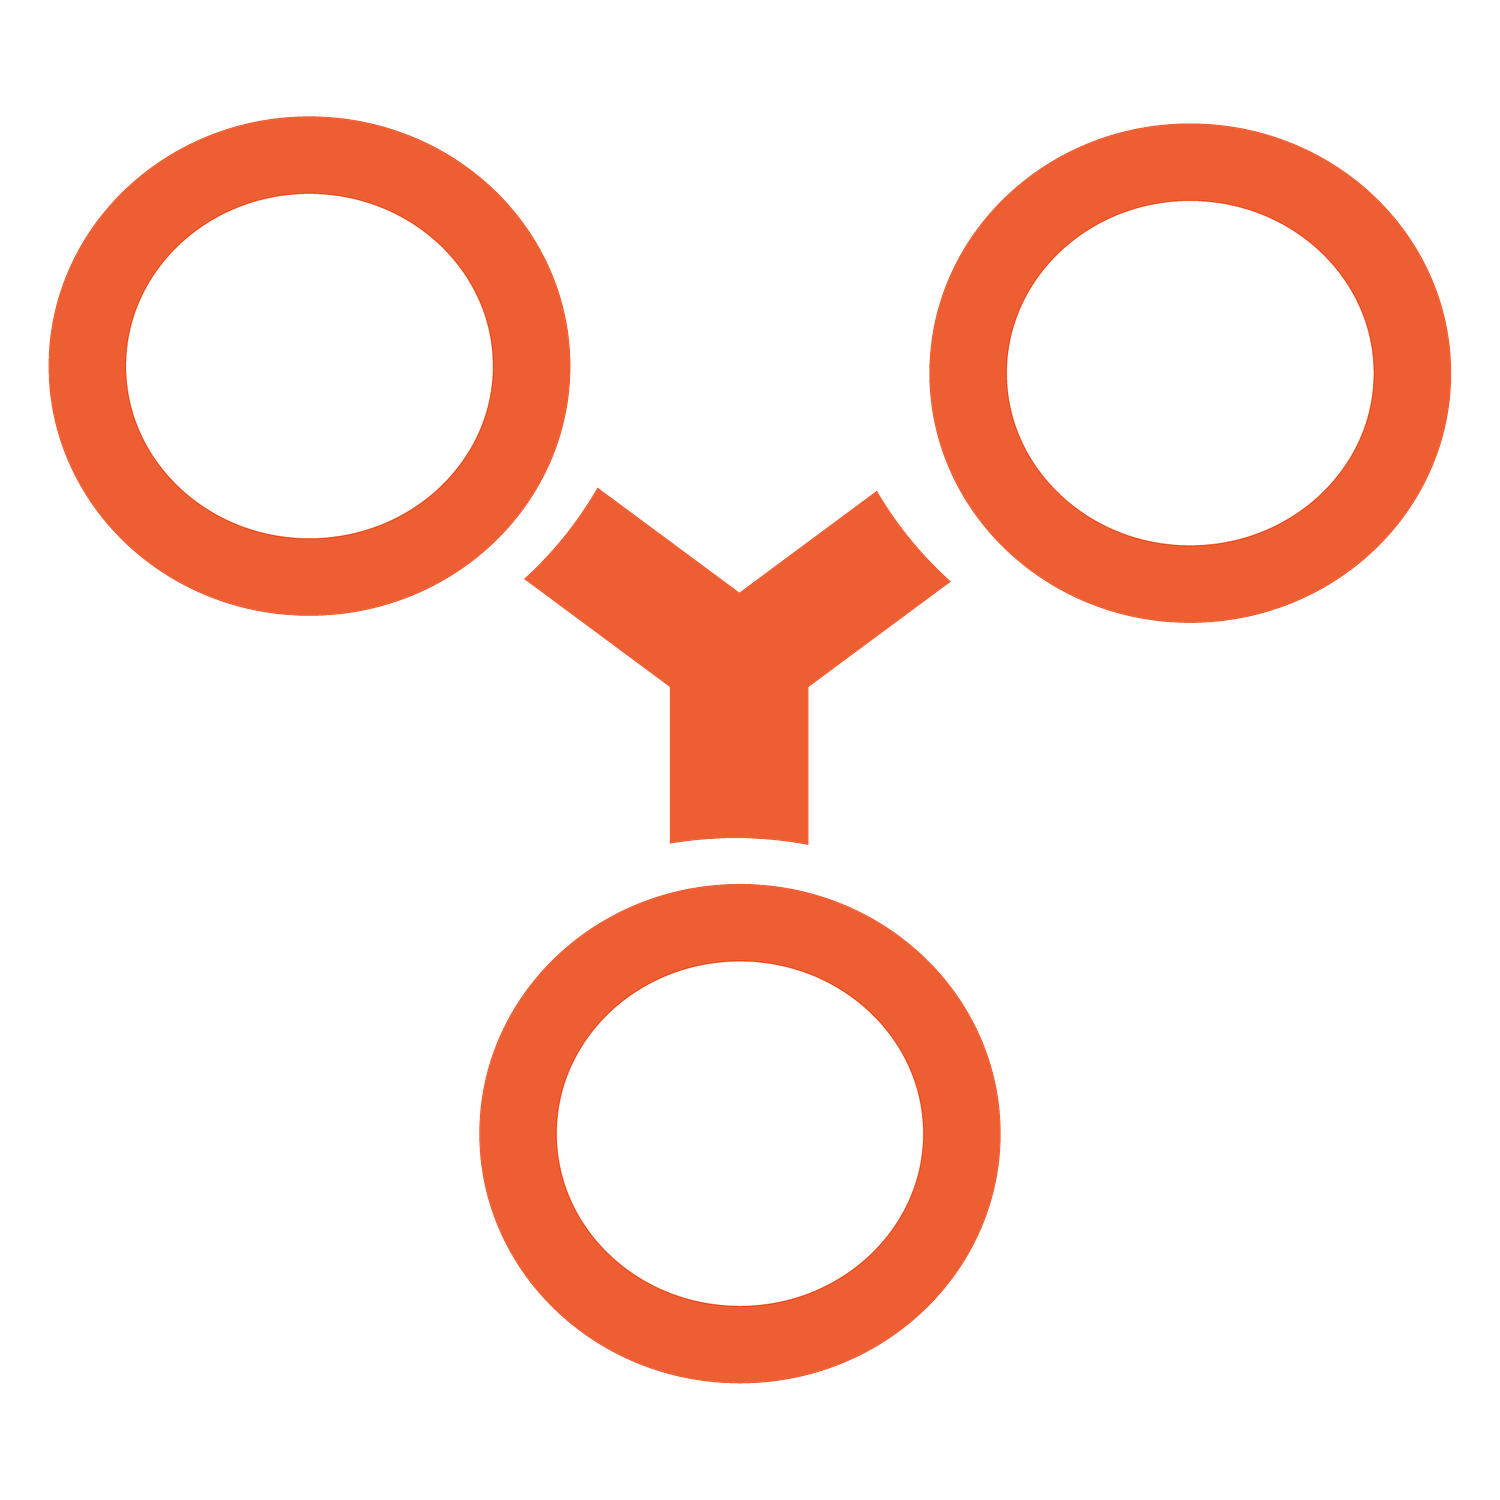 Icon of 3 connected circles